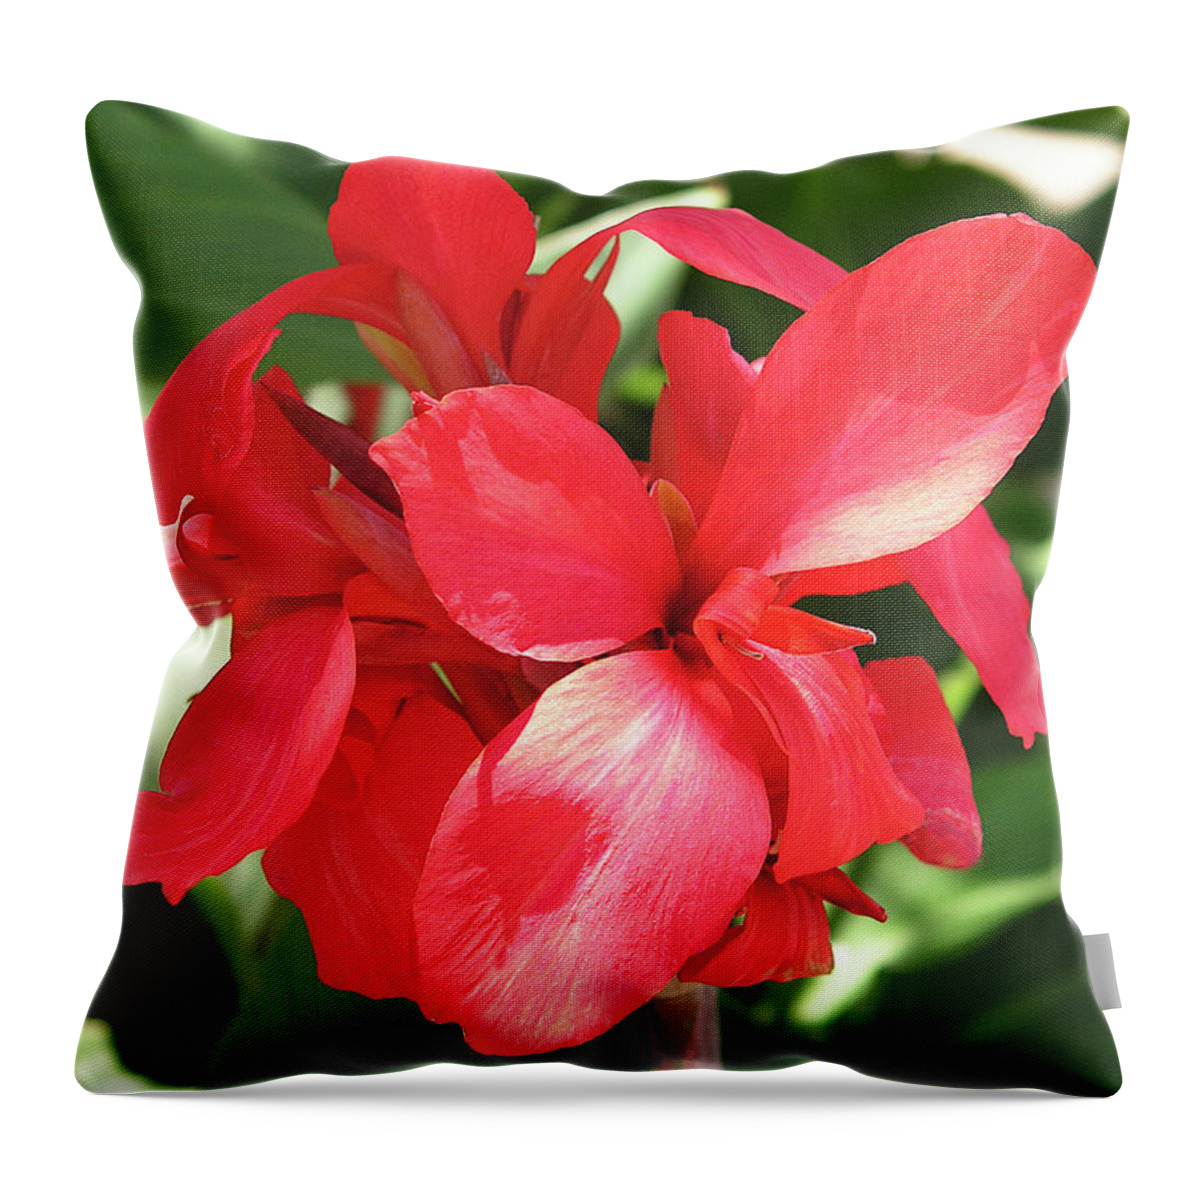 Cannas Flower Throw Pillow featuring the photograph F22 Cannas Flower by Donald K Hall